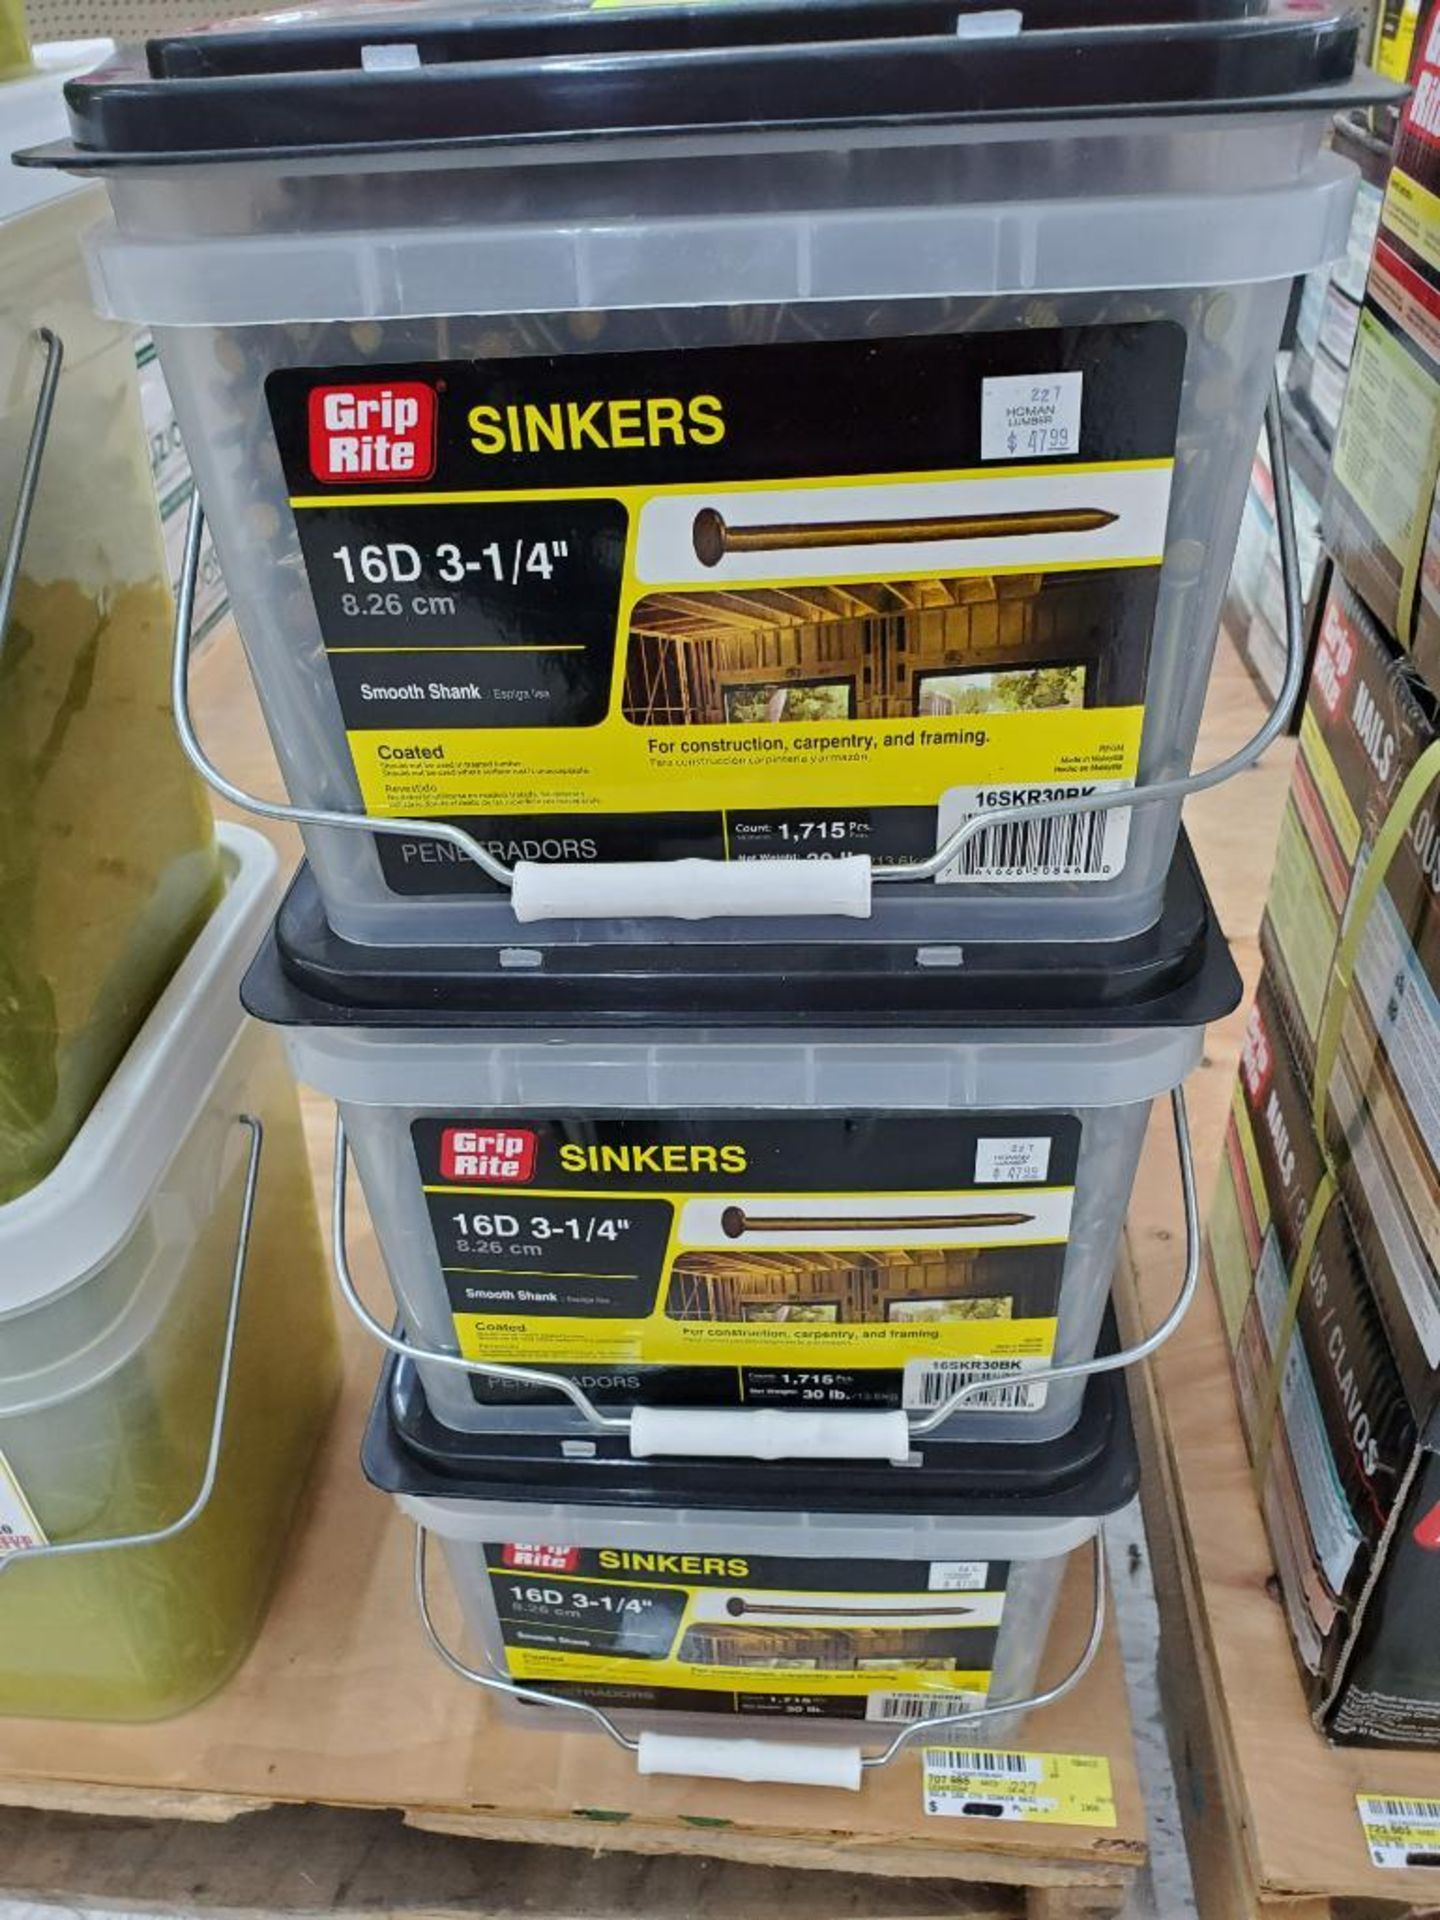 Qty 3 - 30lb boxes of 16D 3-1/4" coated sinker nails. New stock.